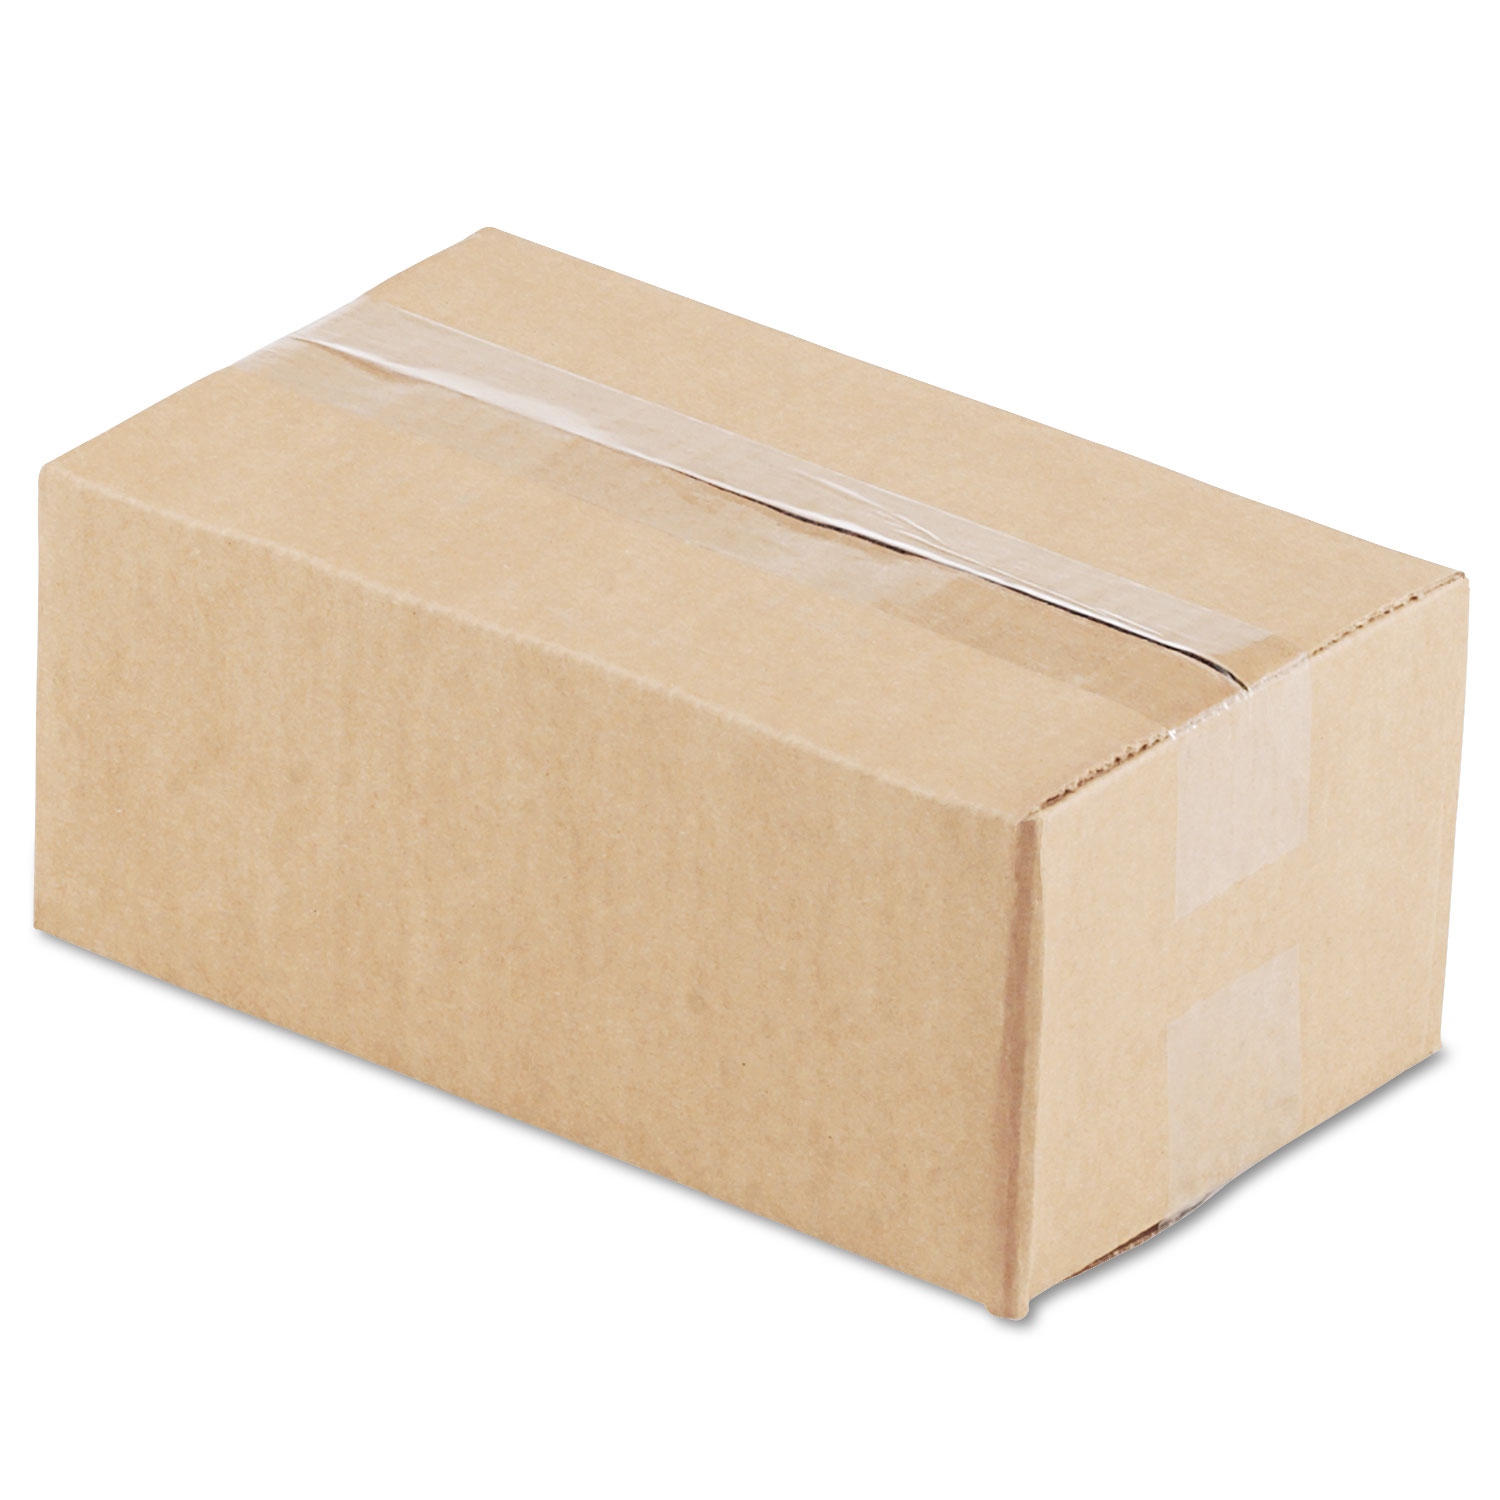 Fixed-Depth Shipping Boxes, Regular Slotted Container (RSC), 10